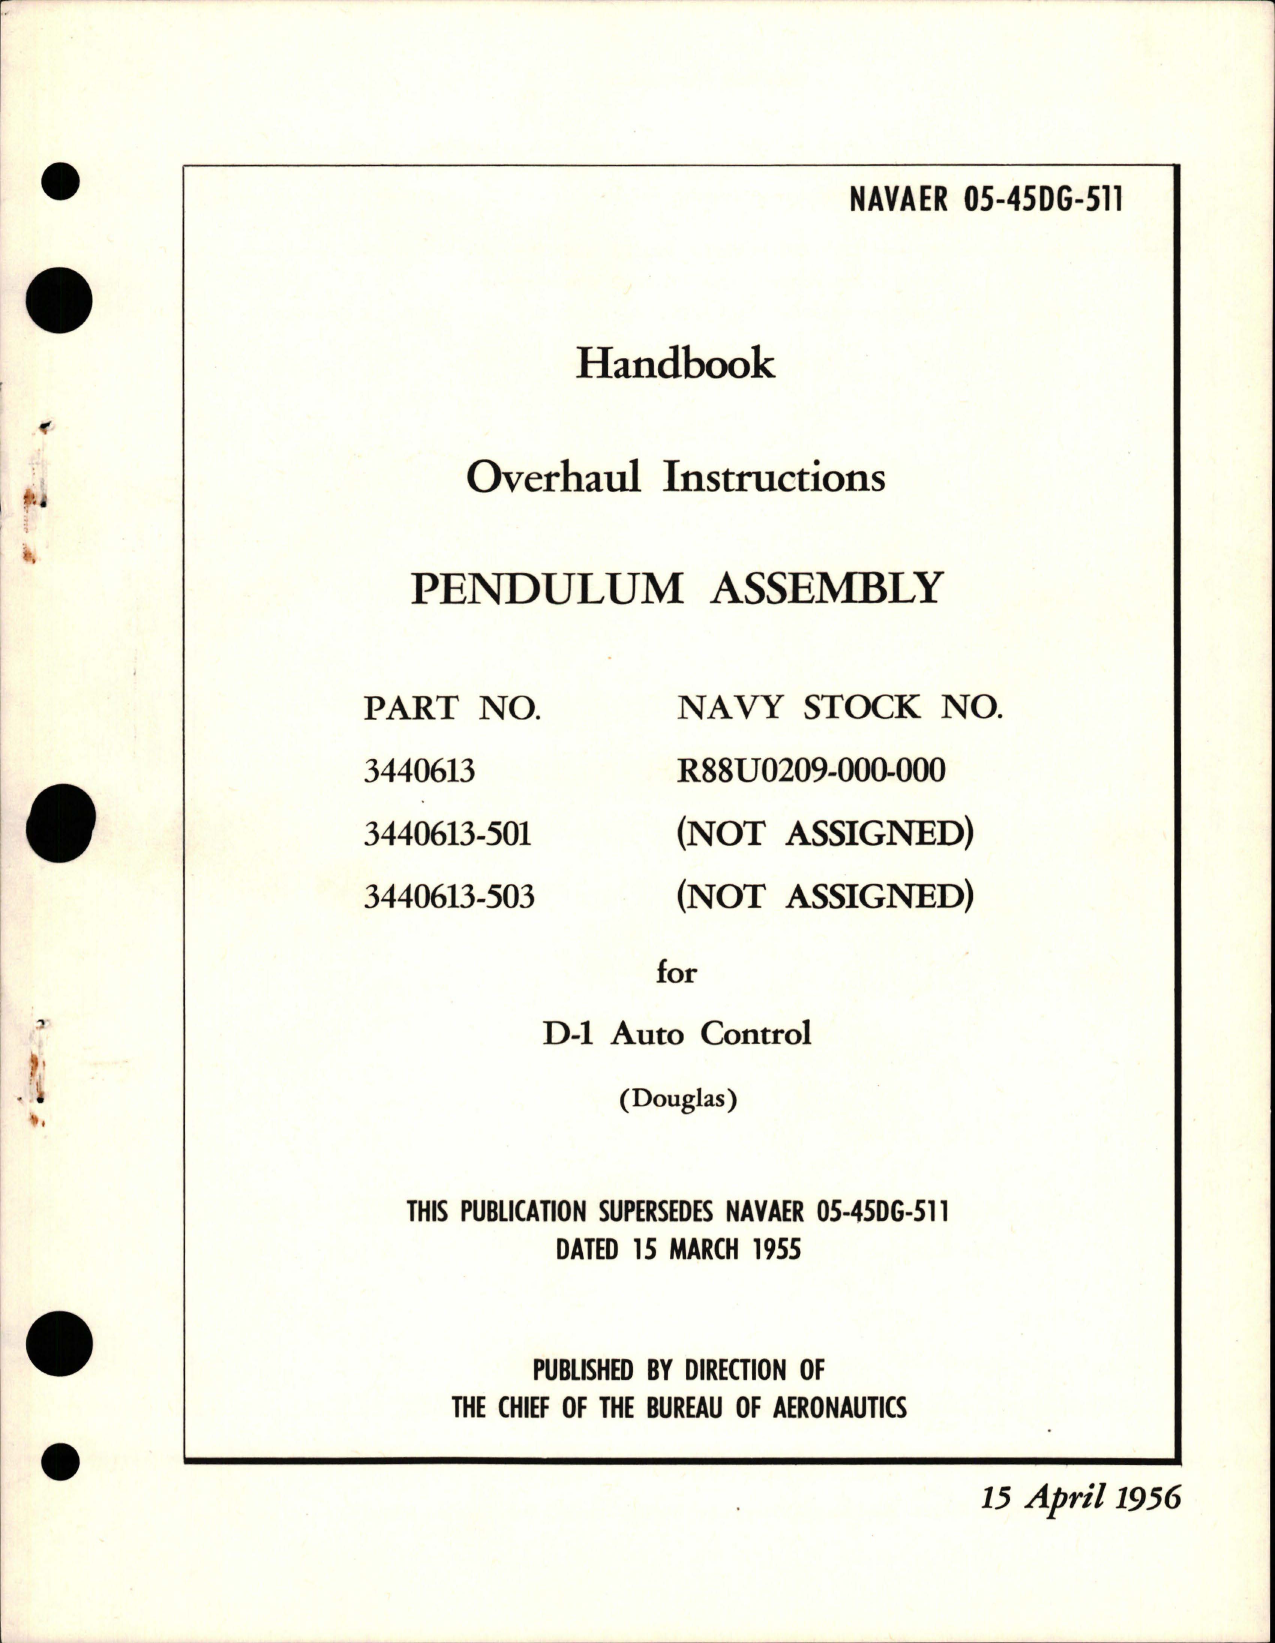 Sample page 1 from AirCorps Library document: Overhaul Instructions for Pendulum Assy - Parts 3440613, 3440613-501, and 3440613-503 for D-1 Auto Control